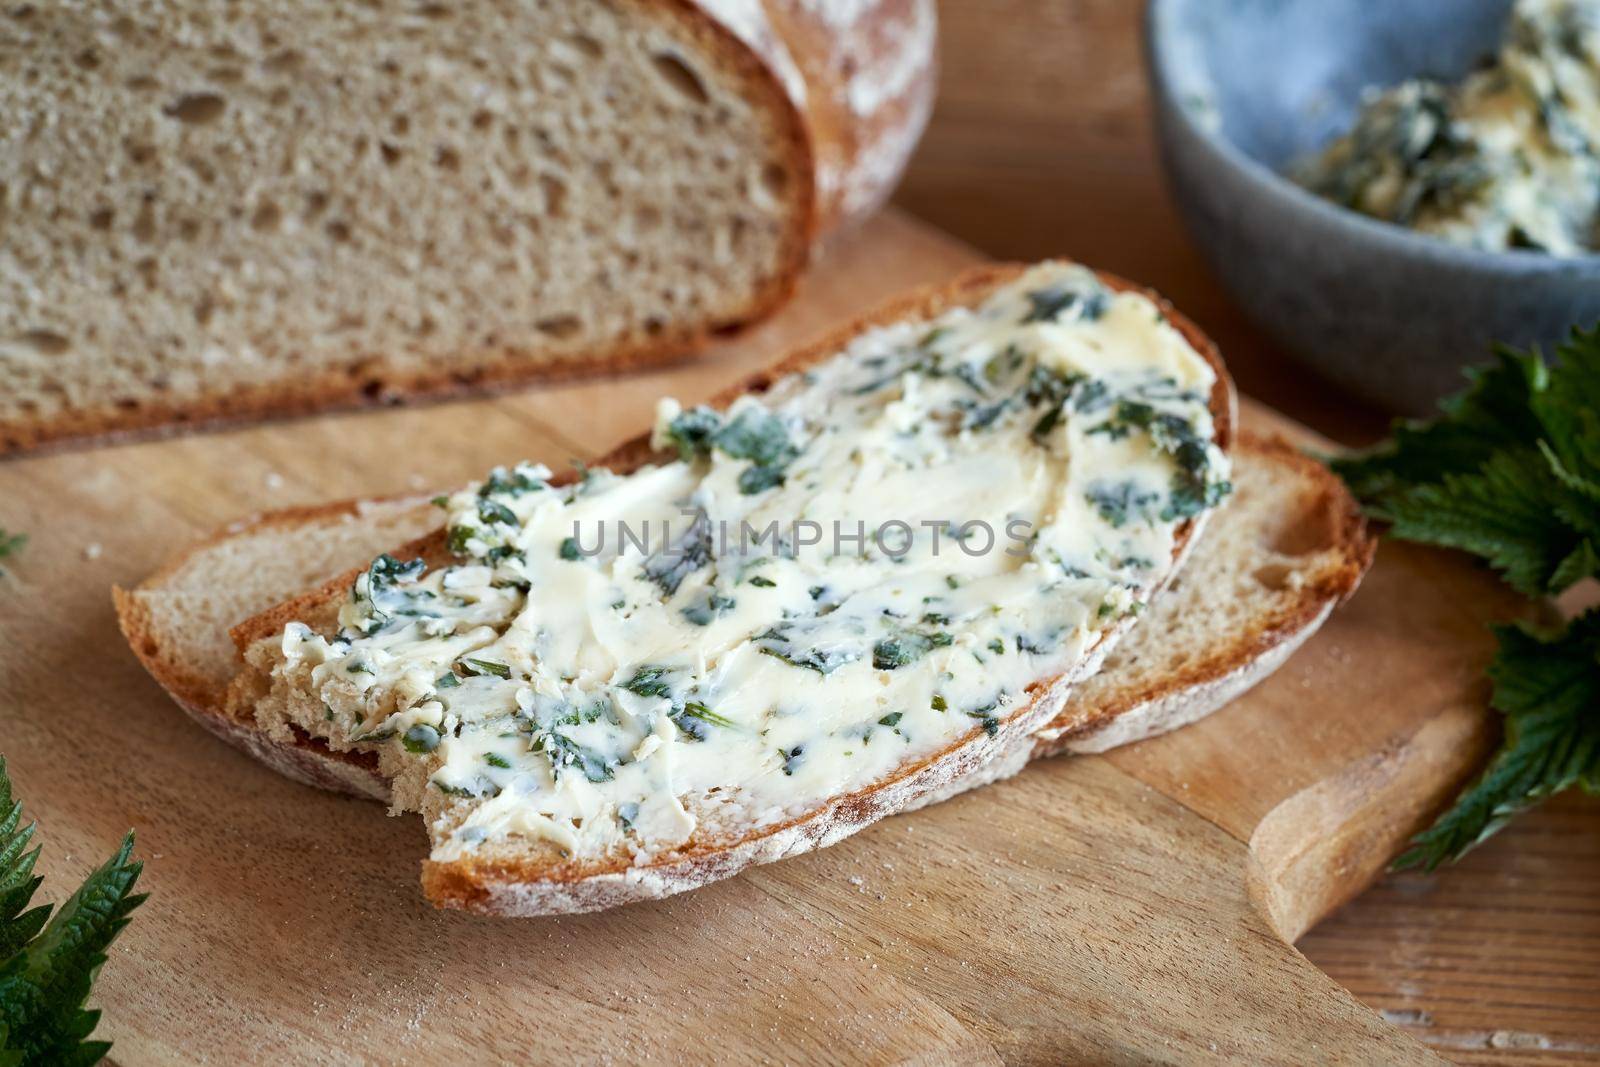 Slice of bread with a herbal spread made from butter and fresh young nettles collected in spring